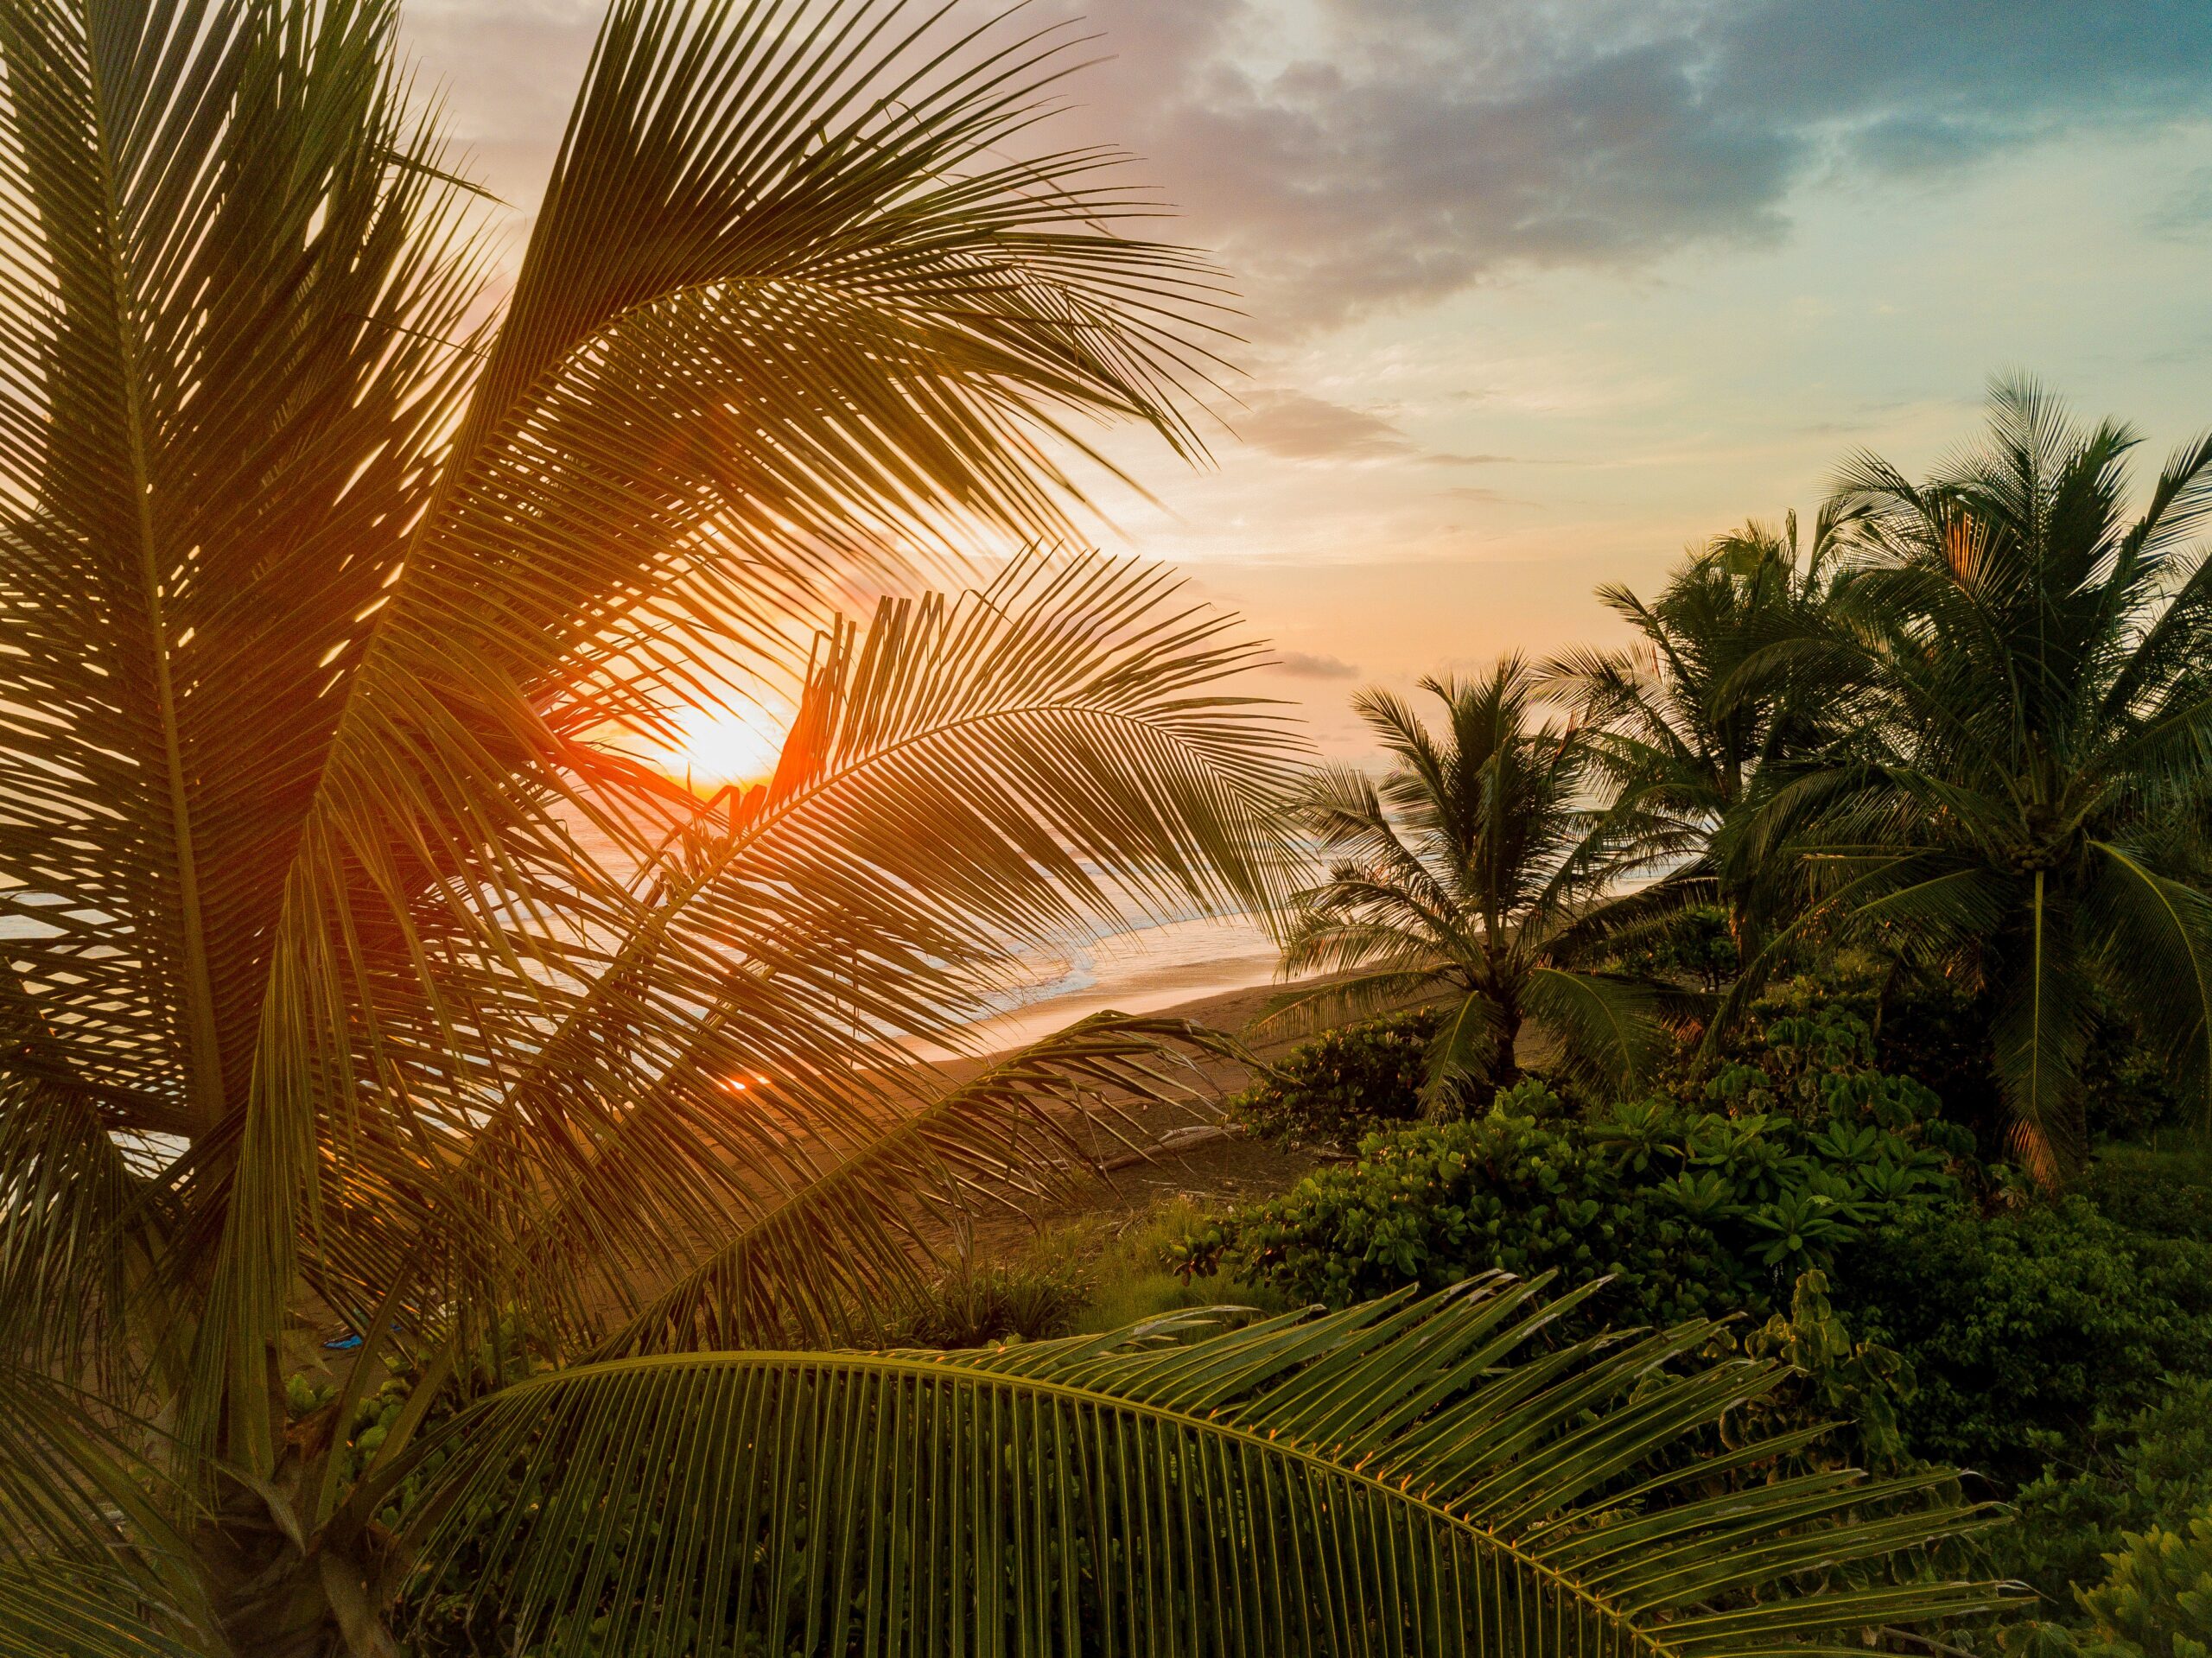 These travel advisories provide the best information on Costa Rica's safety level. 
pictured: a leafy palm trees spread out in front of the setting sun